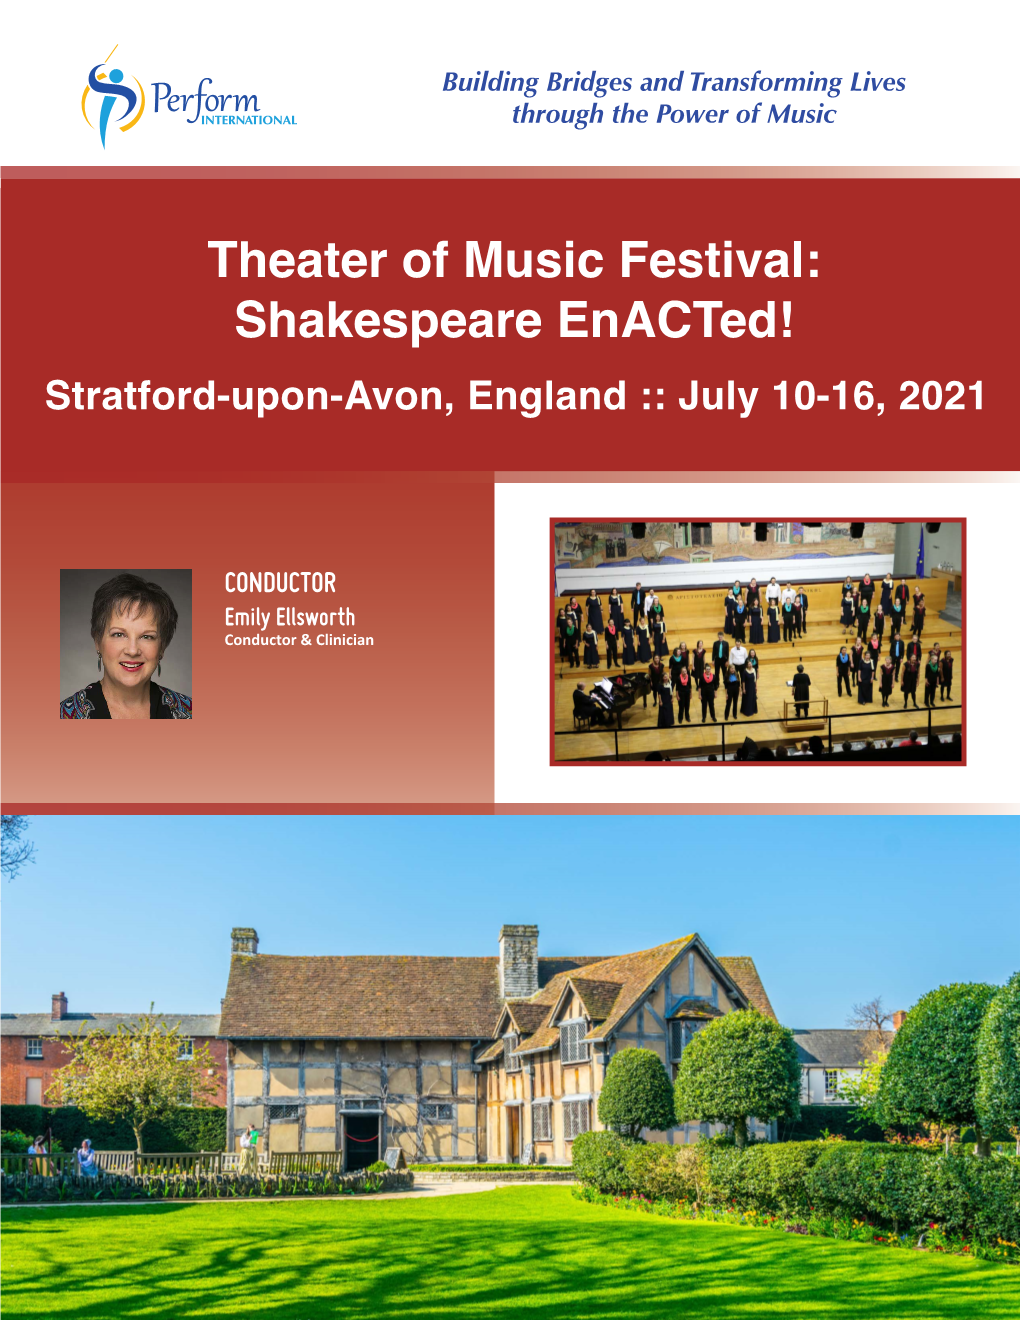 Theater of Music Festival: Shakespeare Enacted! Stratford-Upon-Avon, England :: July 10-16, 2021